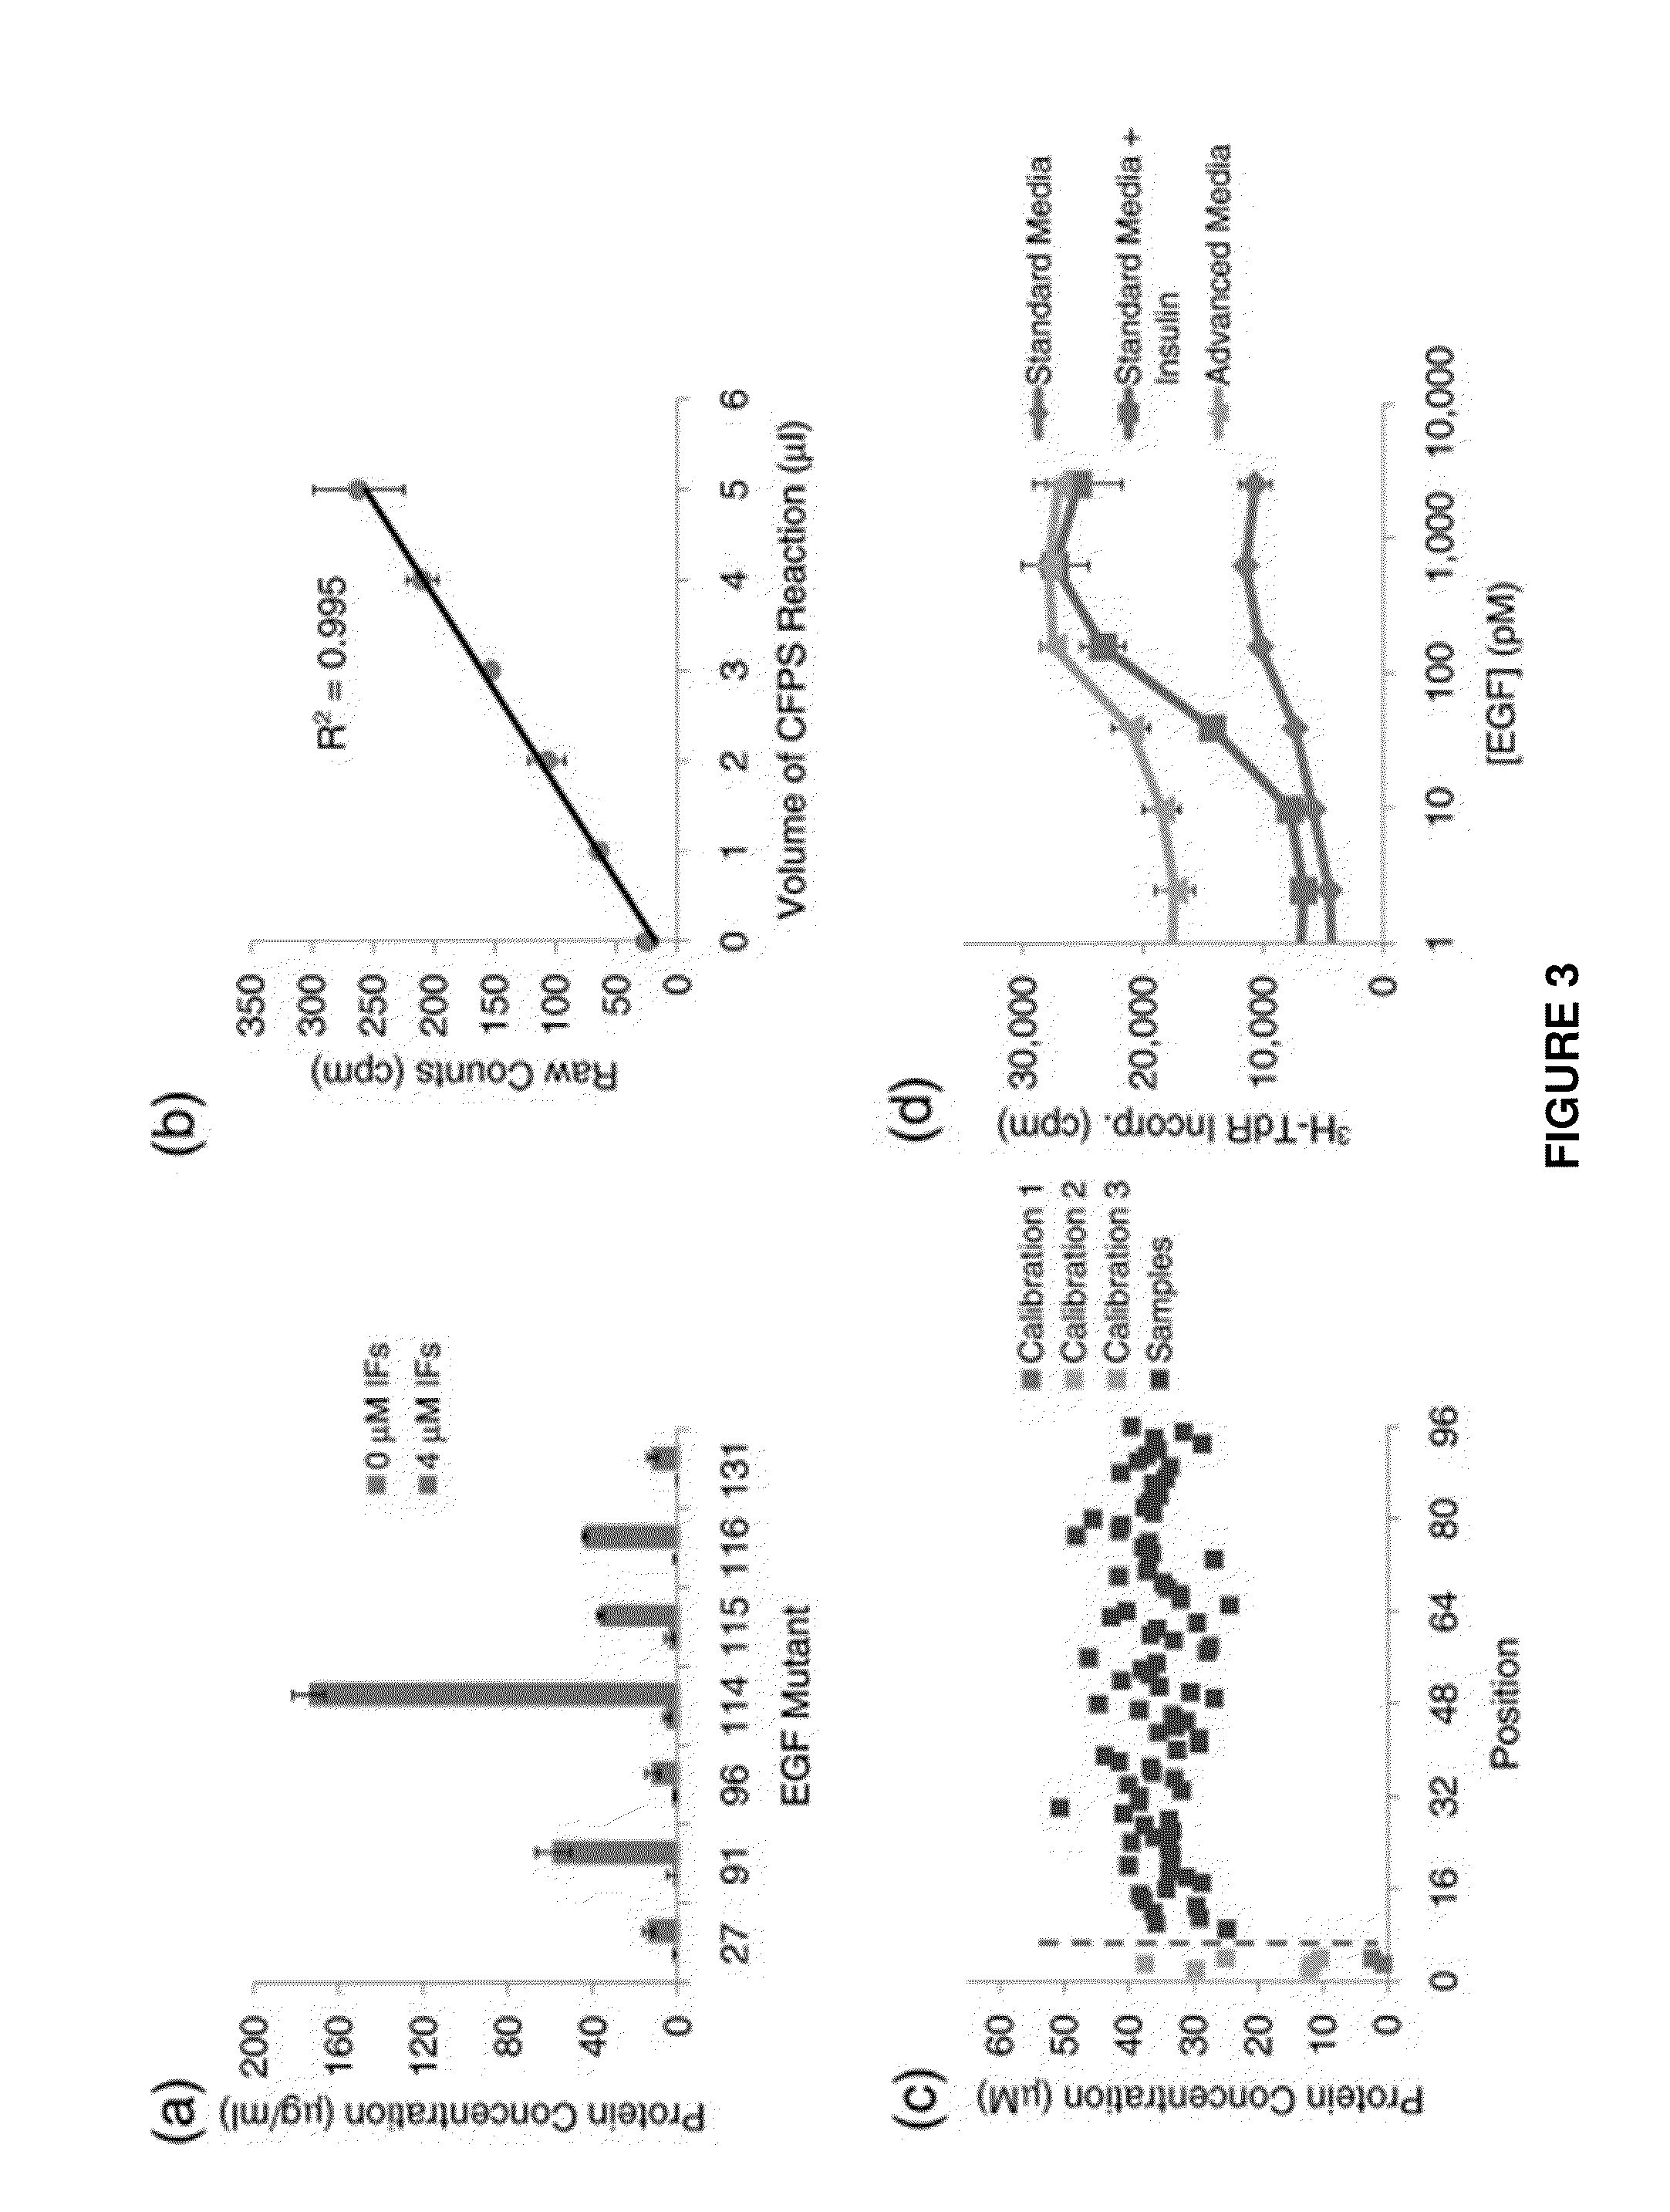 Mutant Epidermal Growth Factor Polypeptides with Improved Biological Activity and Methods of Their Making and Use